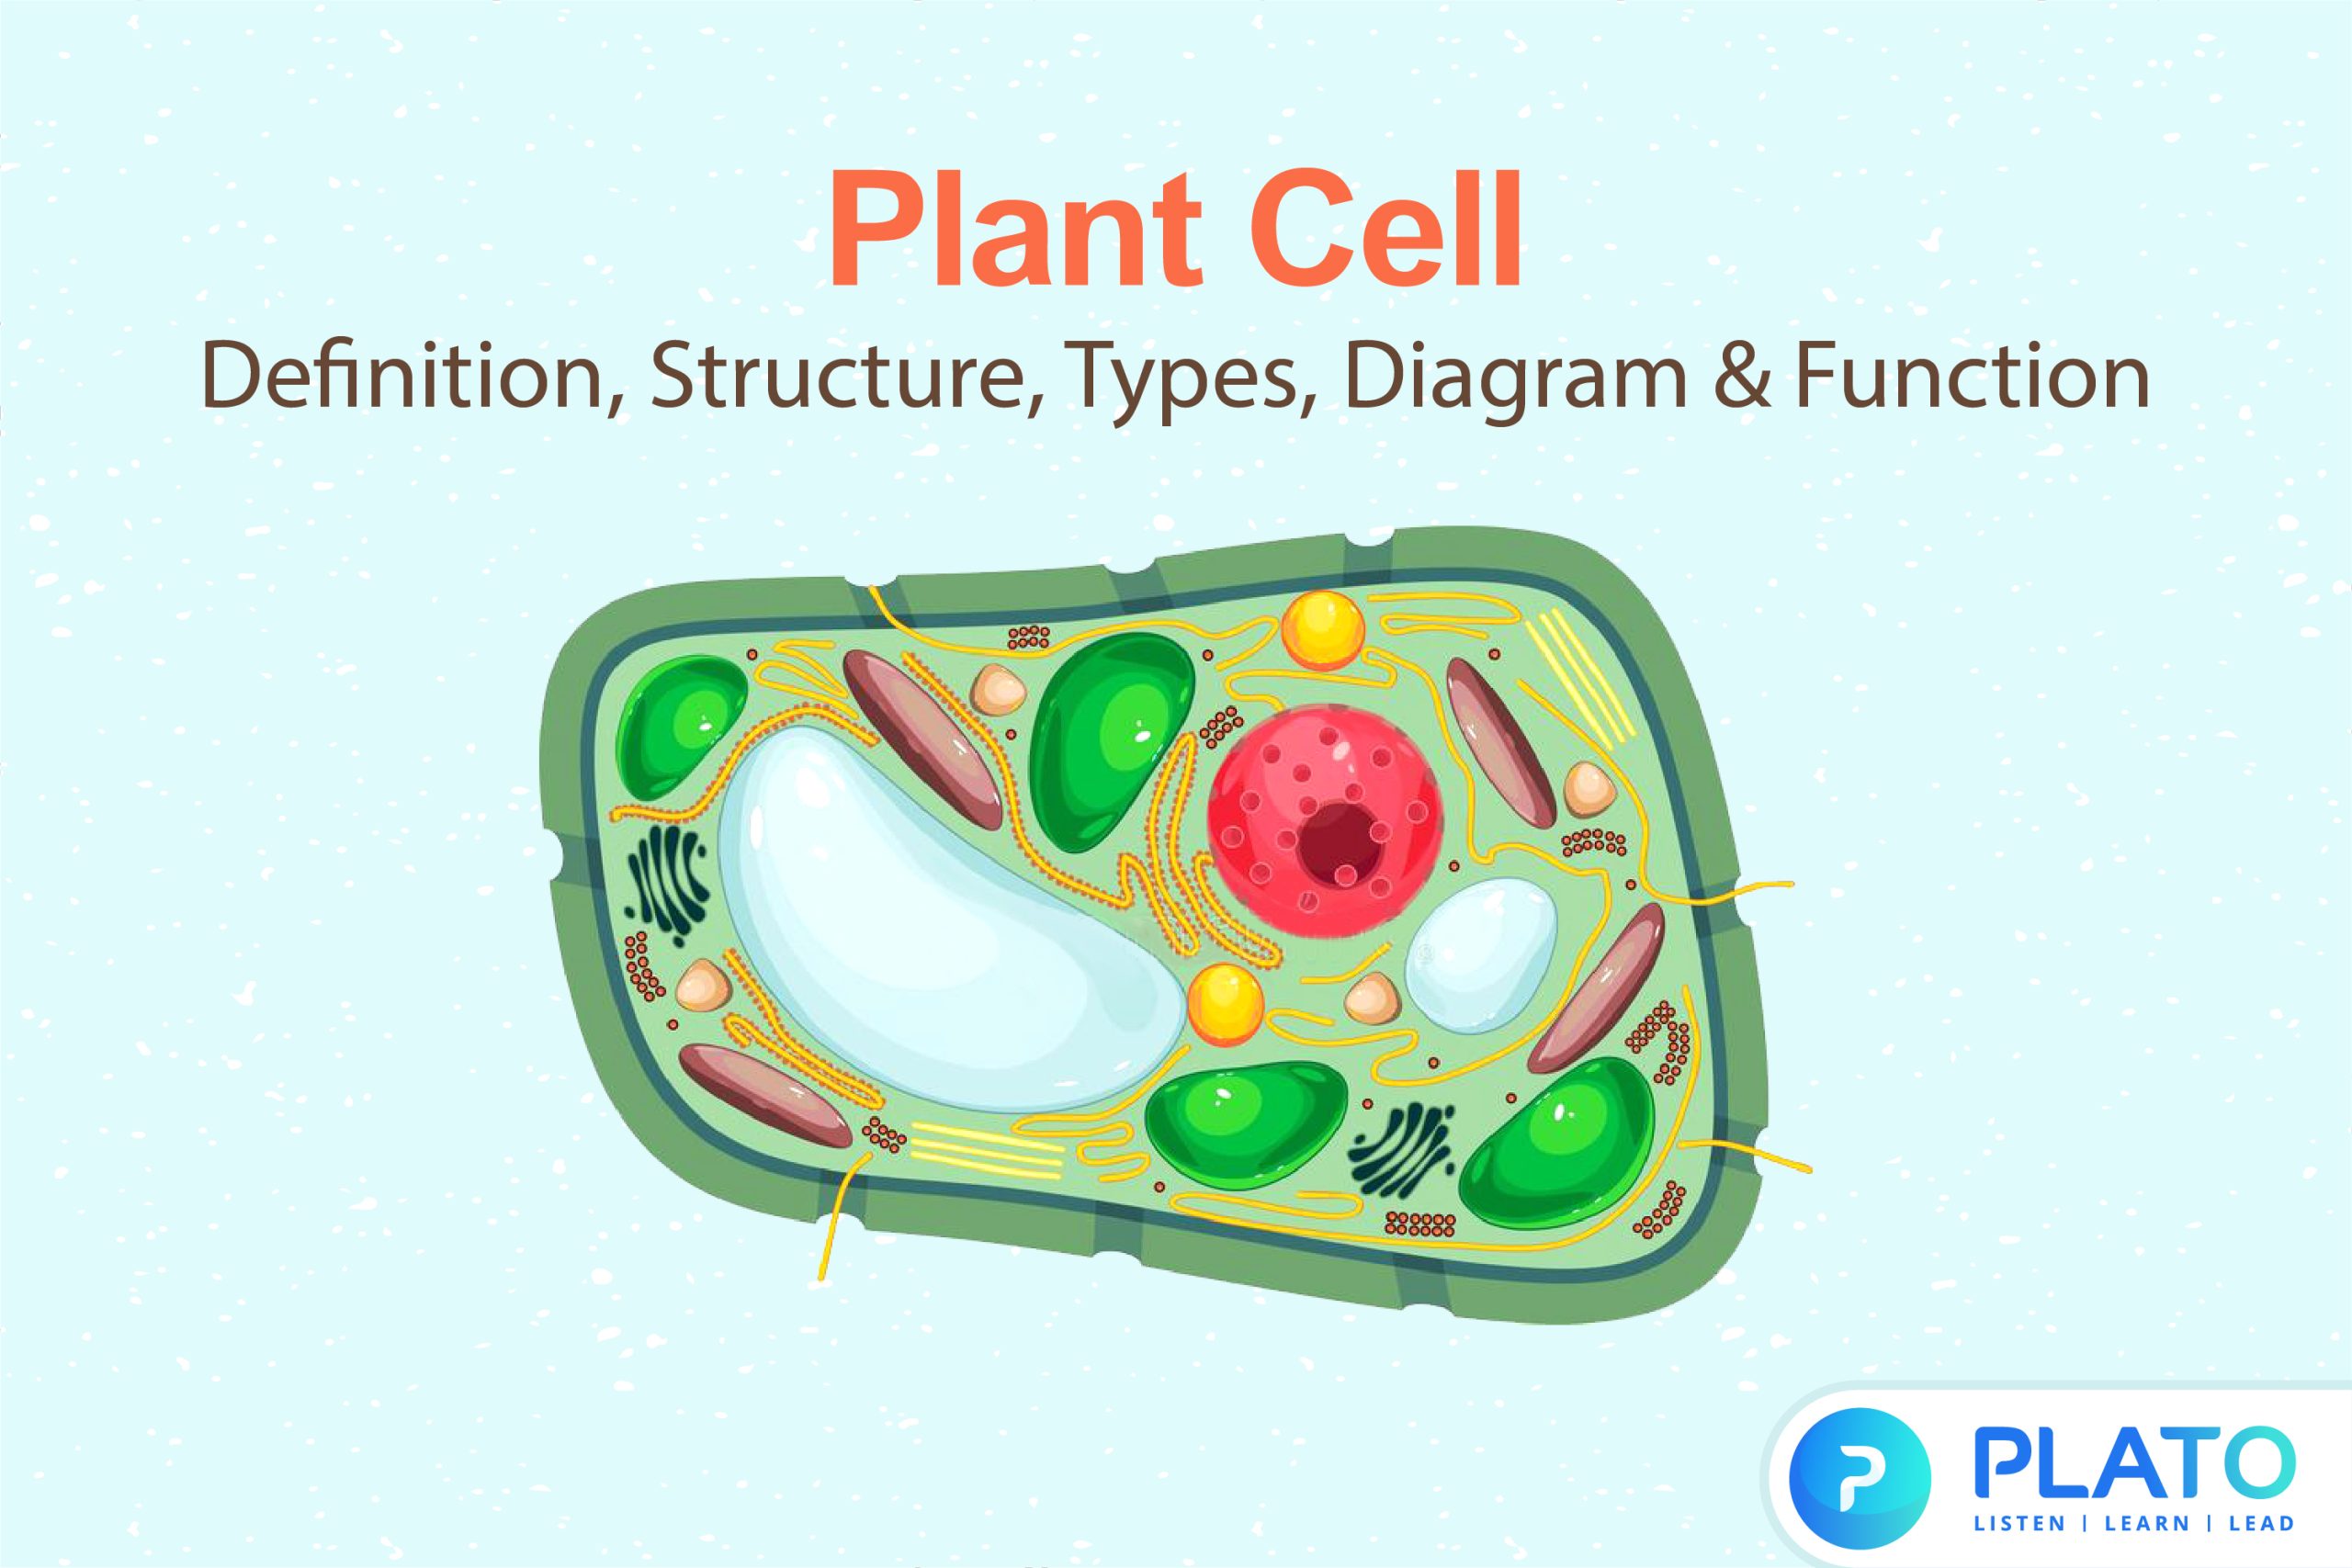 Plant Cell - Definition, Structure, Types, Diagram & Function - Plato Online